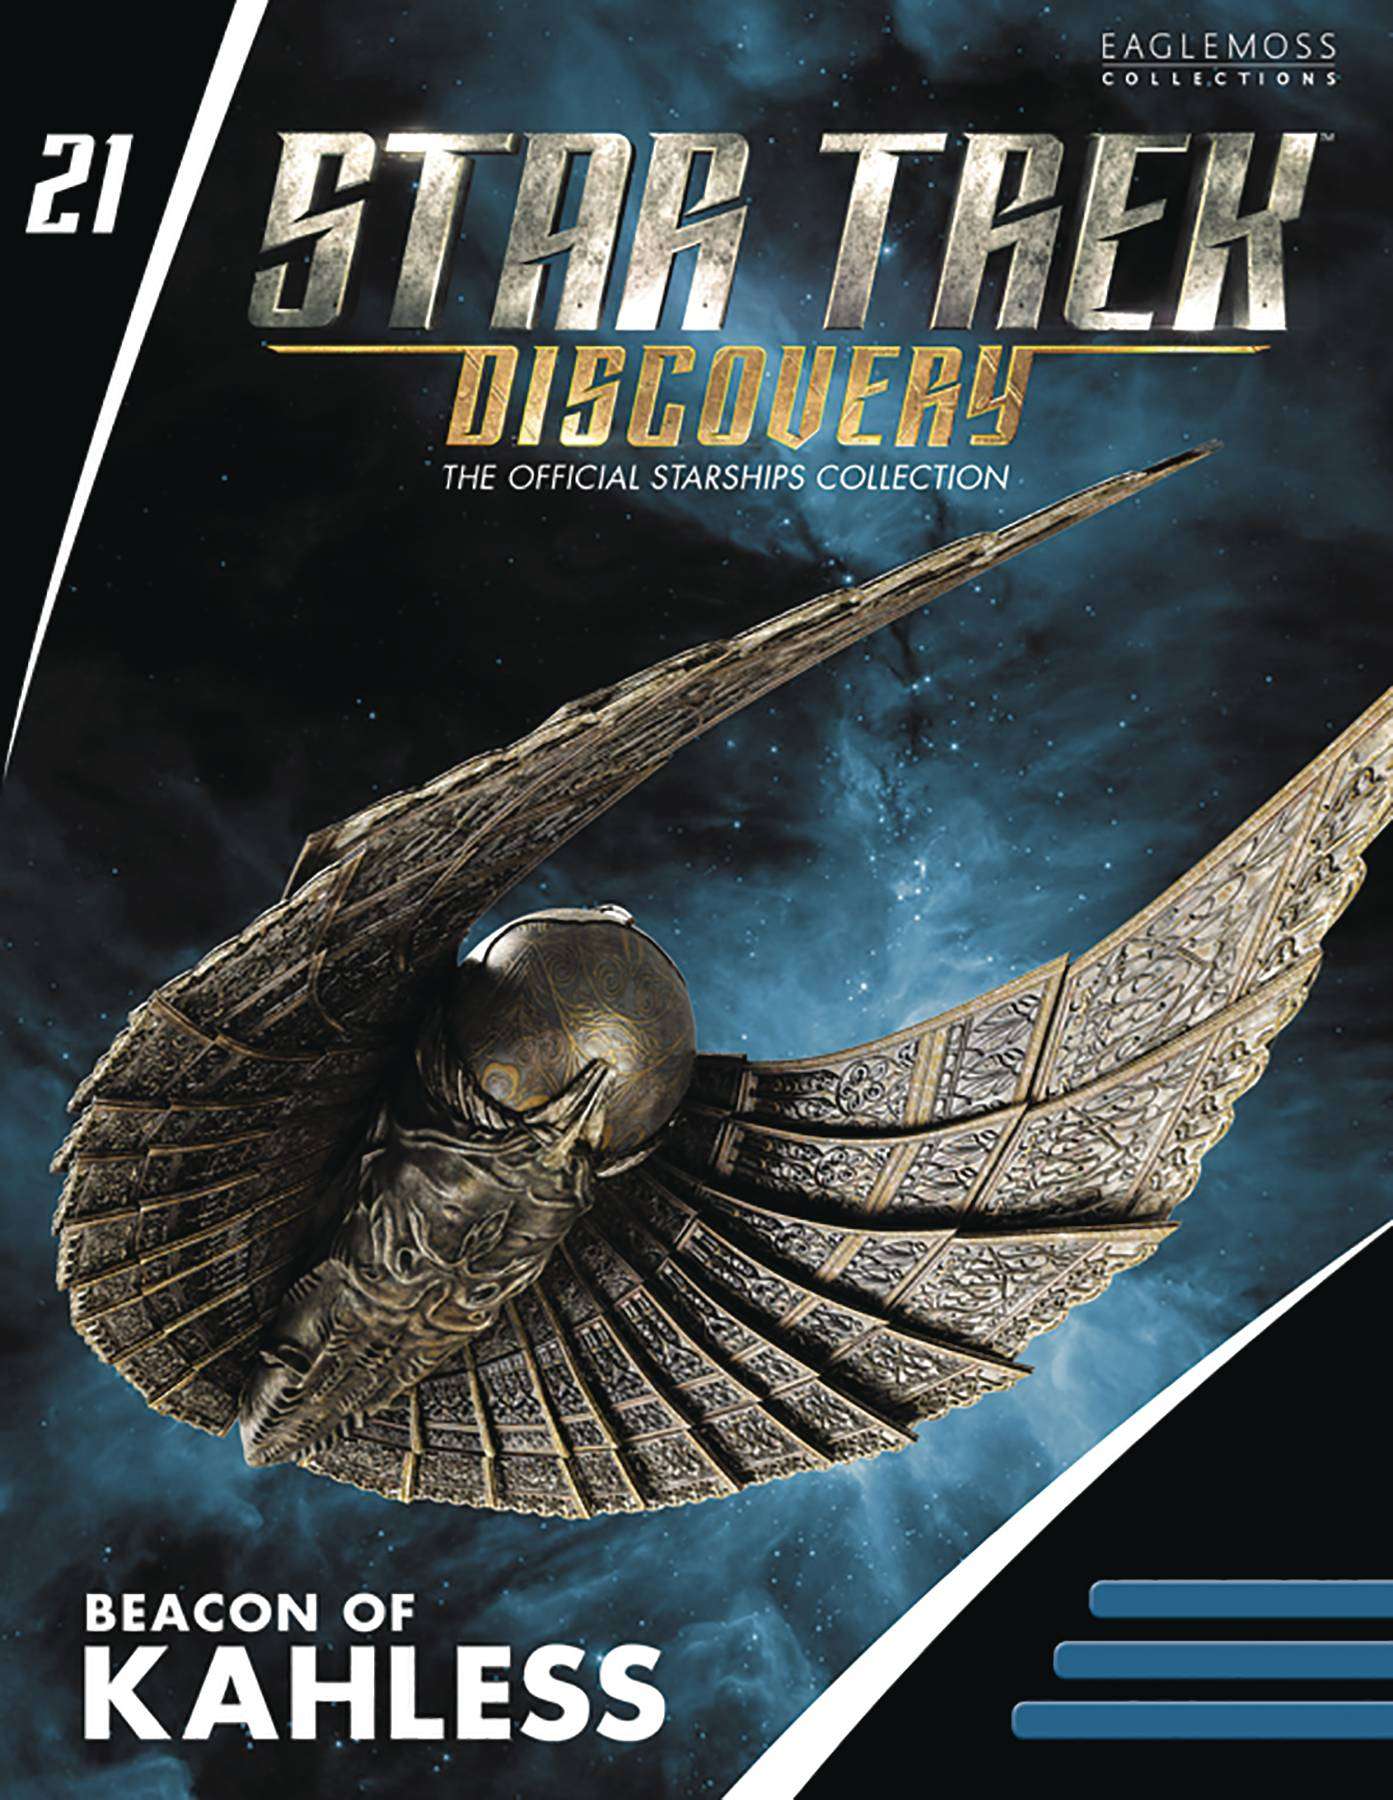 STAR TREK DISCOVERY FIG MAG #21 BEACON OF KAHLESS